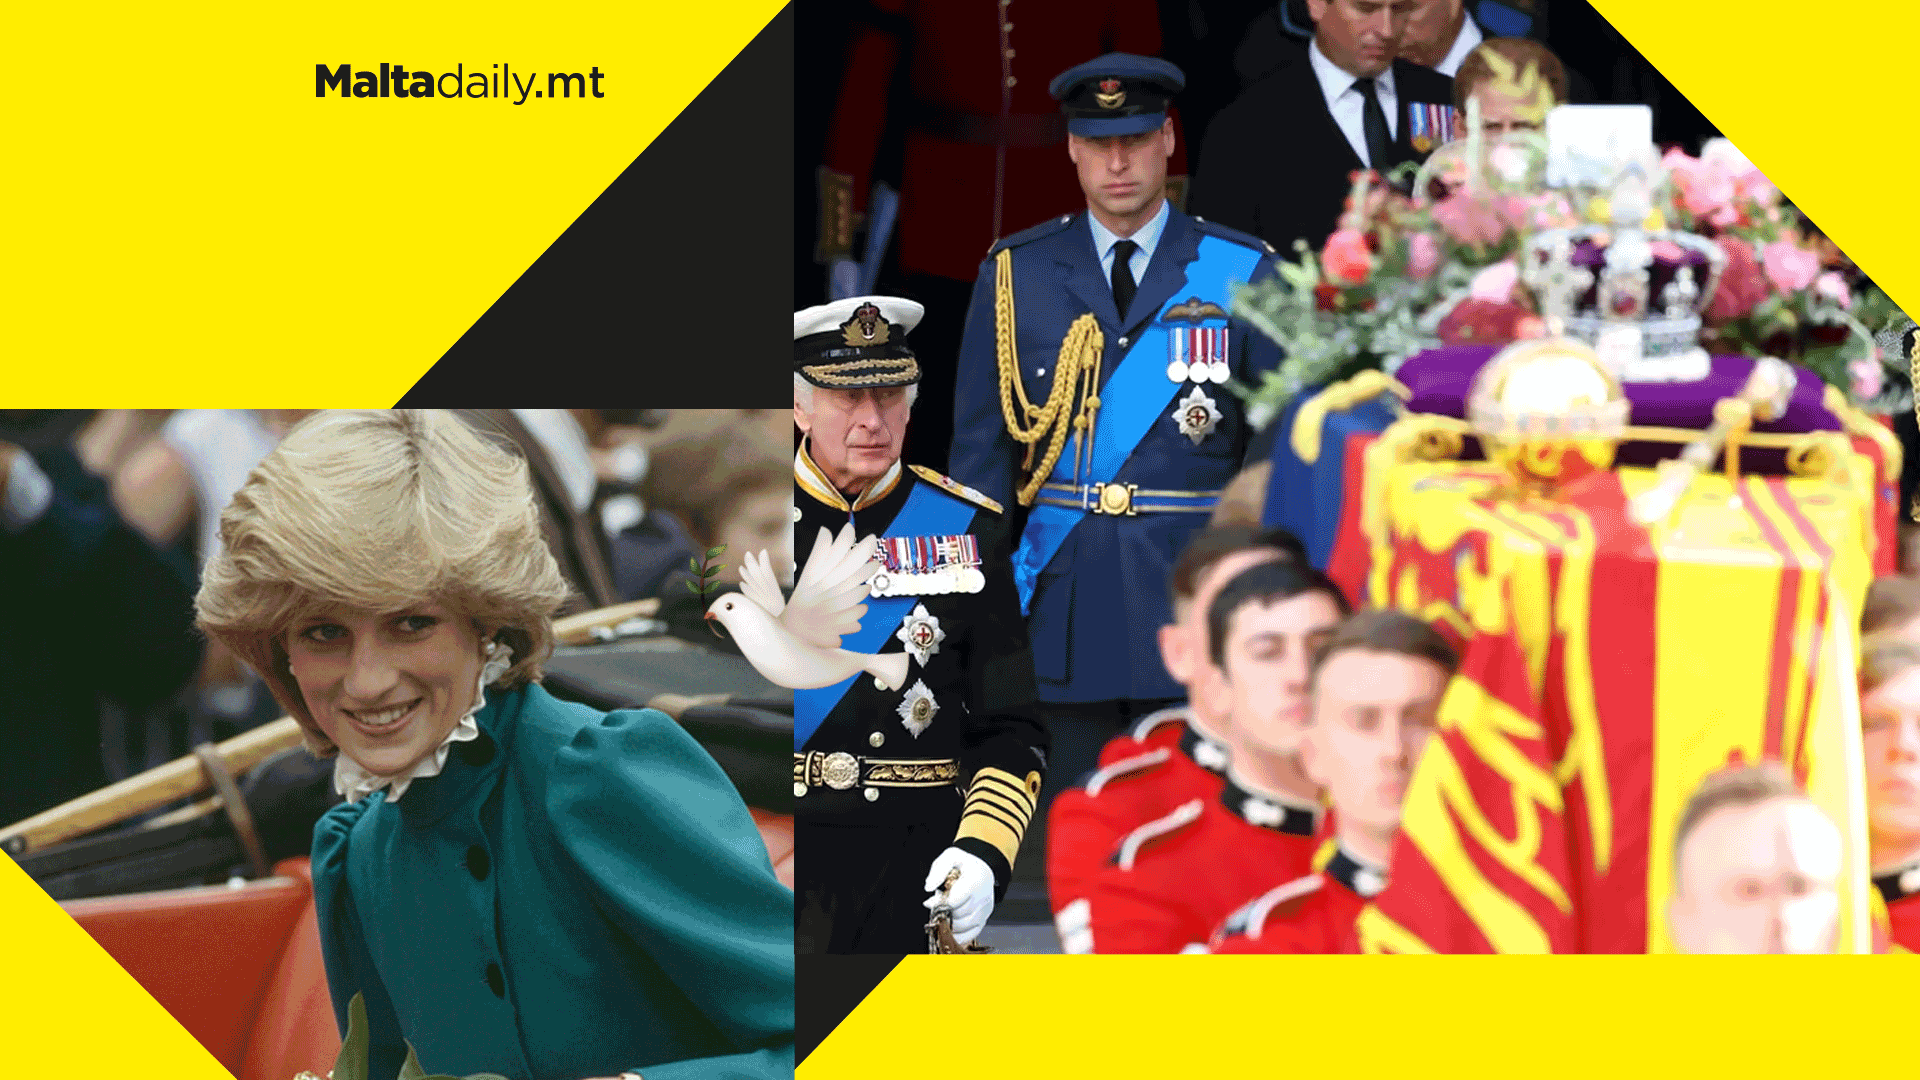 The Queen's funeral had less viewers than Princess Diana's funeral according to estimates